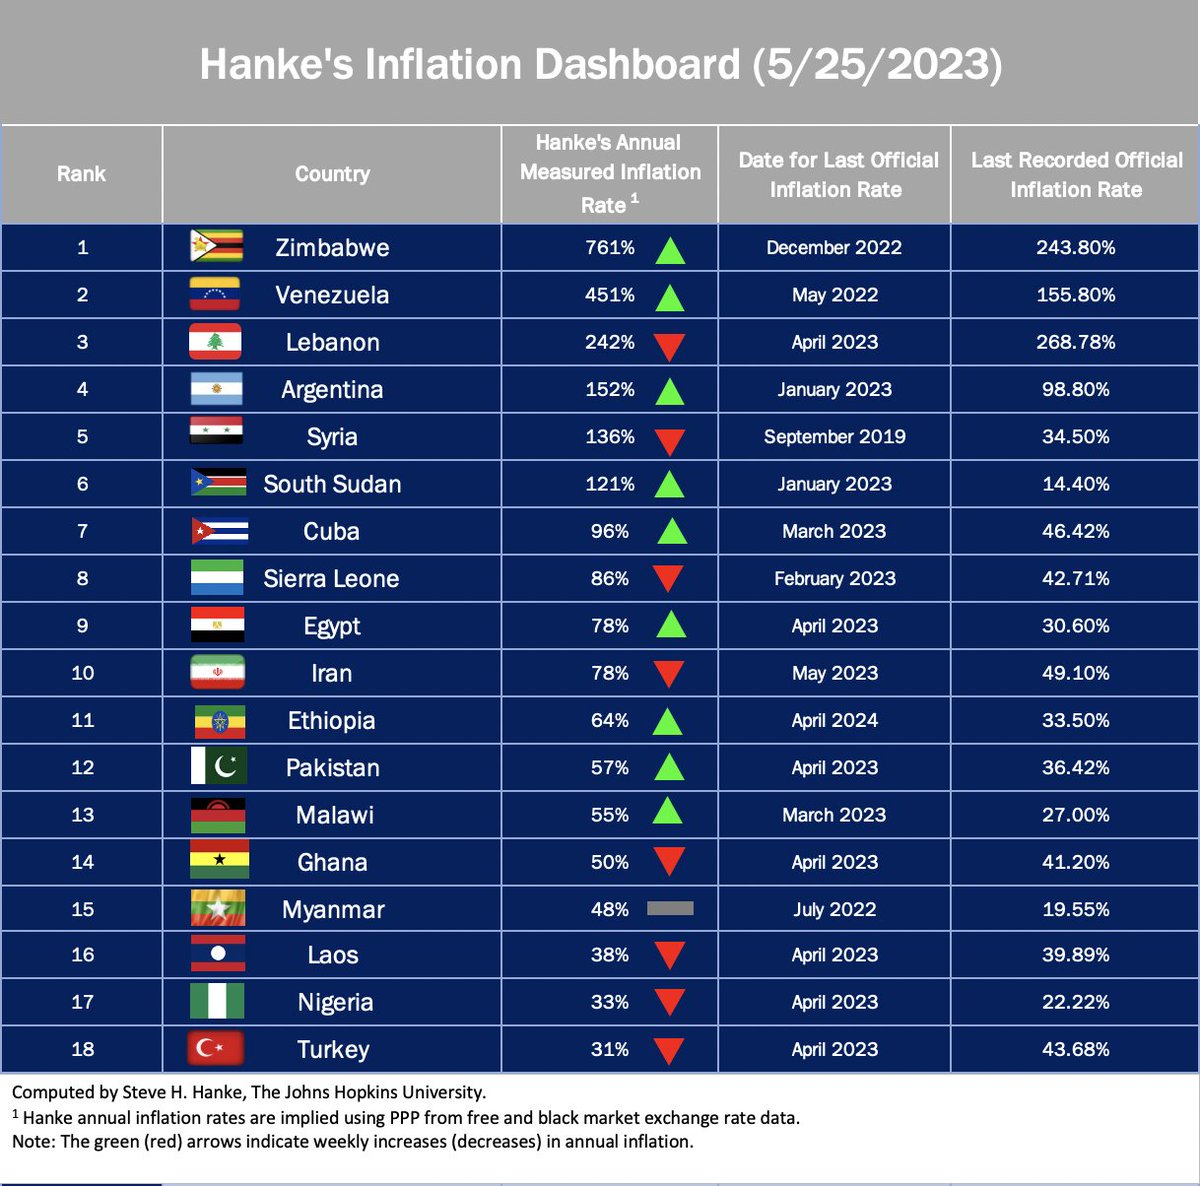 Day by day, Lebanon moves closer to becoming a failed state under the incompetent Mikati government as the pound trades near record lows. In this week's Hanke's Inflation Roundup, #Lebanon is in 3rd place. On May 25, I measured Leb's #inflation at a SKY-HIGH 242%/yr.